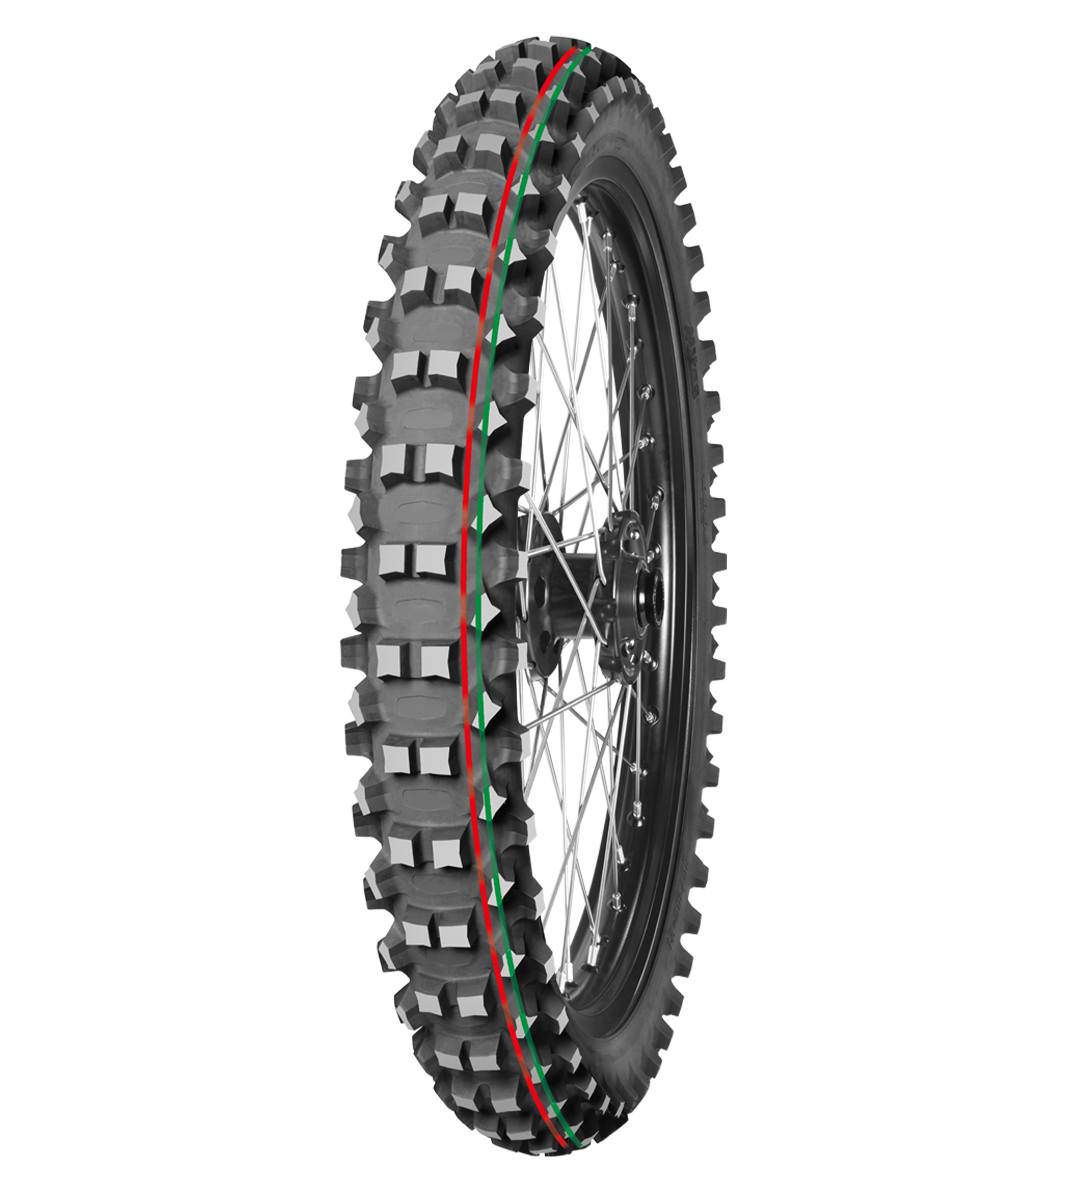 Mitas TERRA FORCE-MX MH 70/100-17 Motocross Competition Off-Road MEDIUM TO HARD 40M Red &amp; Green Tube Front Tire, 226162, 70/100-17, Front, Motocross, Motocross Competition, Off-Road, Terra Force, Terra Force-MX MH, Trail, Tires - Imported and distributed in North &amp; South America by Lindeco Genuine Powersports - Premier Powersports Equipment and Accessories for Motorcycle Enthusiasts, Professional Riders and Dealers.